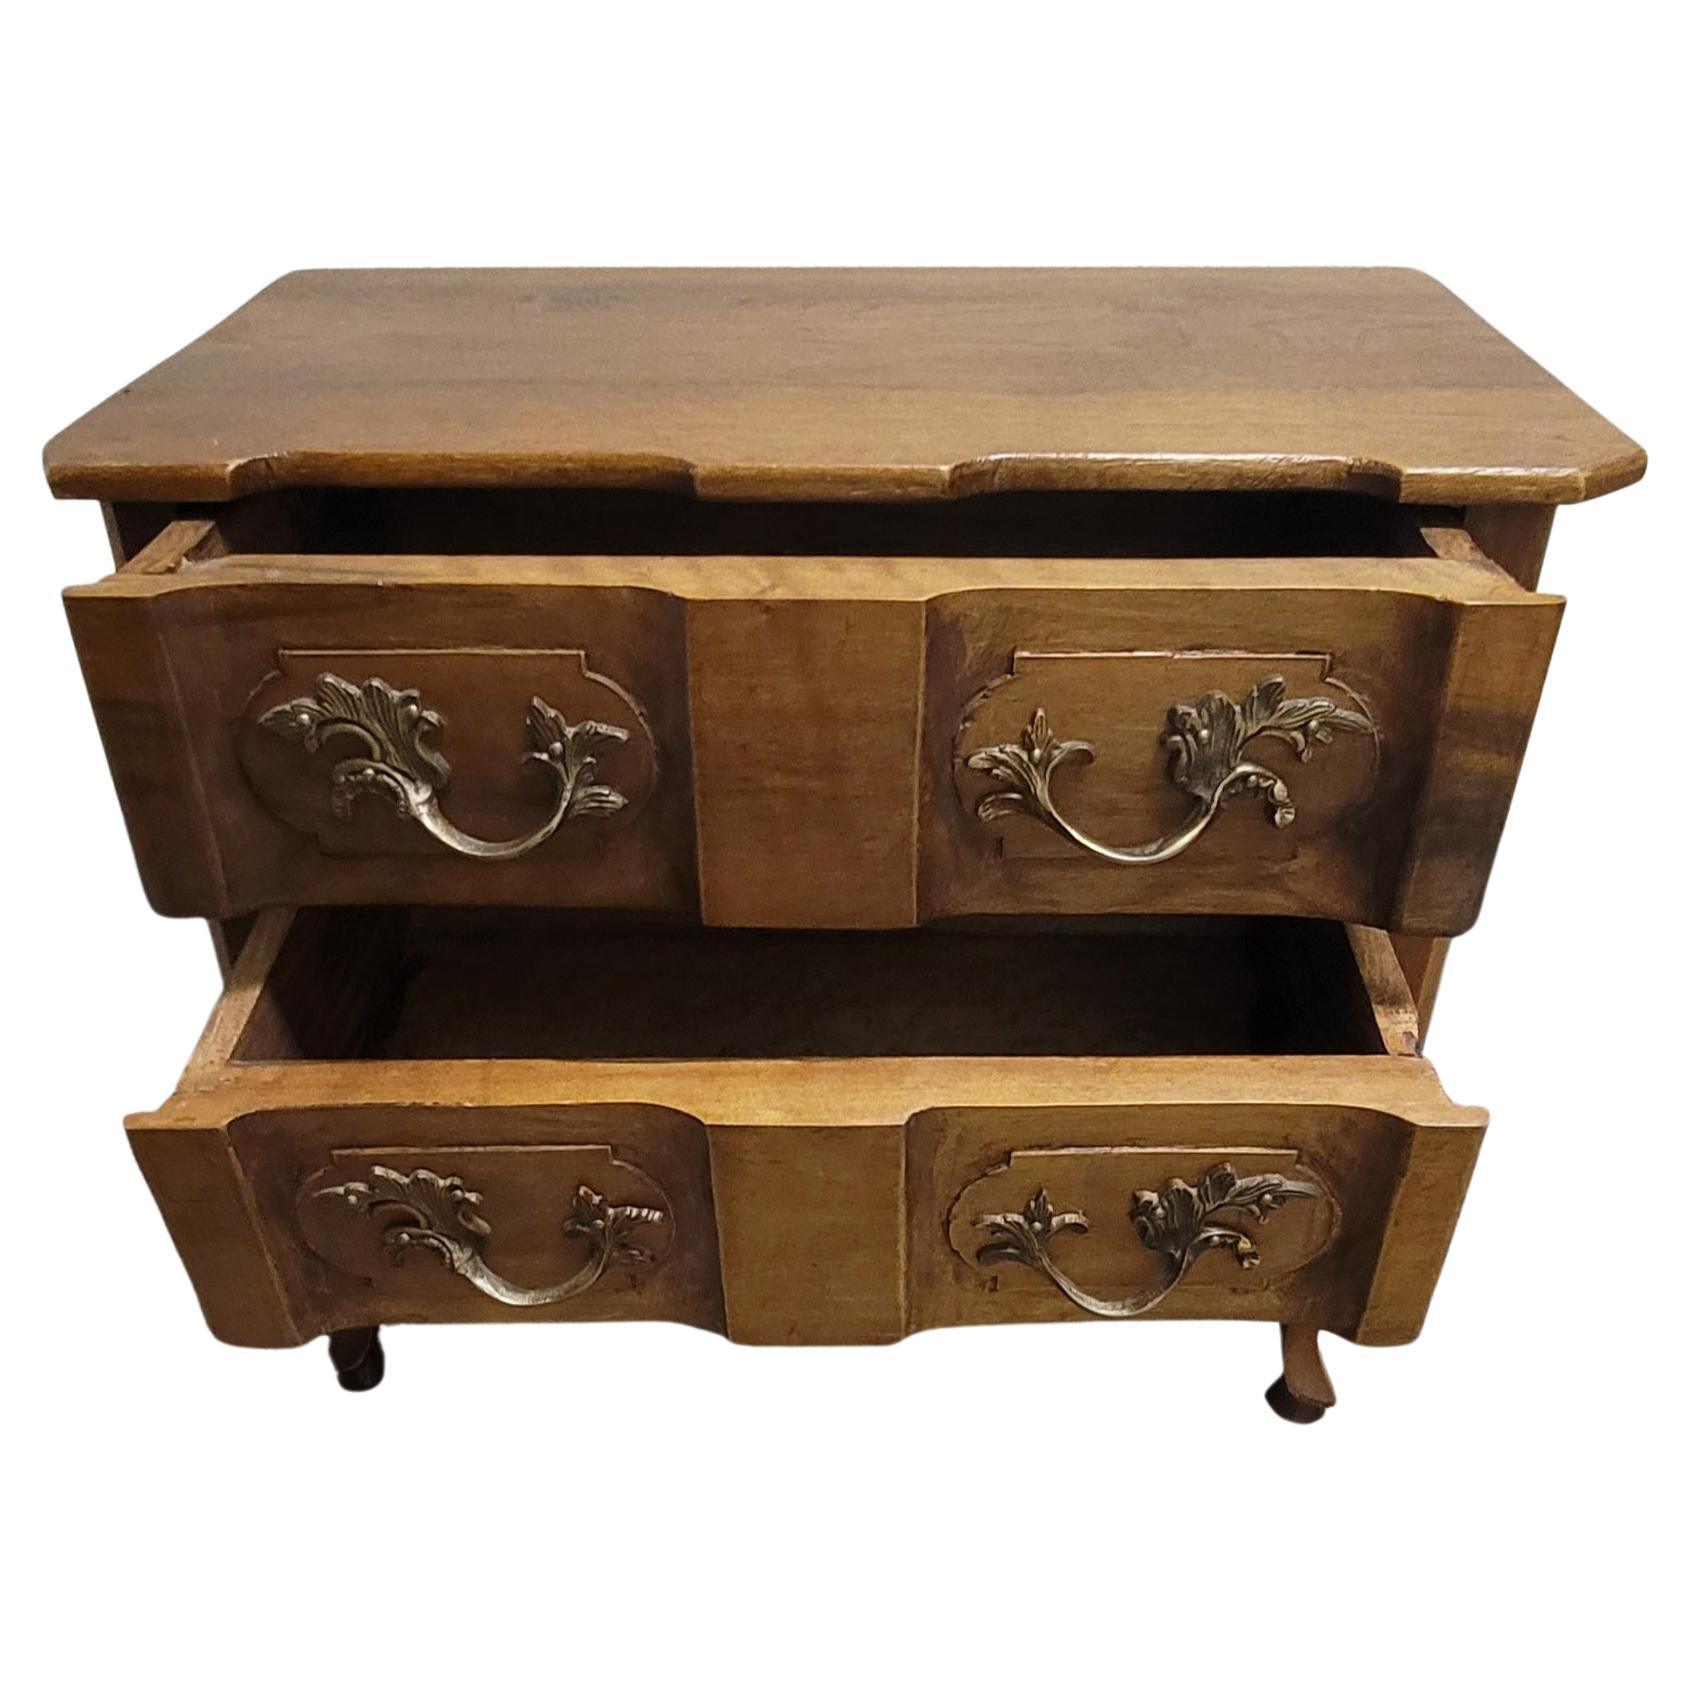 Hand-Crafted French Provincial Walnut Diminutive Commode w/ Hand-Rubbed Finish For Sale 2